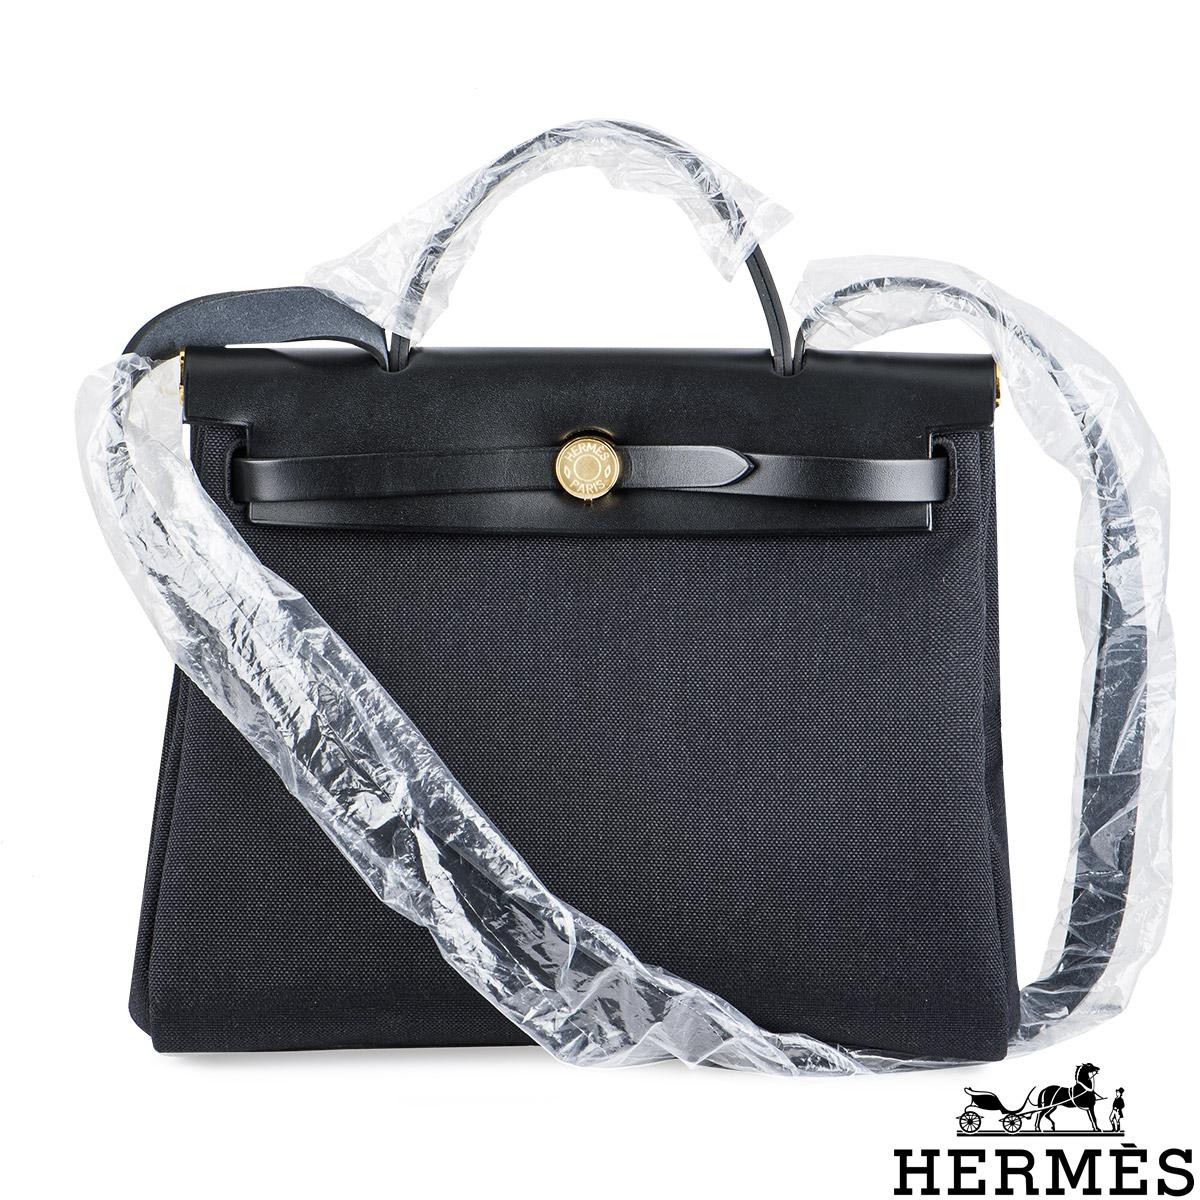 A chic Hermes Herbag Zip 31 handbag. The exterior of this Herbag features a top handle with a crossbody strap in Noir Vache Hunter leather on the top section whereas the body of the bag is made out of Noir Toile Militaire canvas, has a Clou de Selle